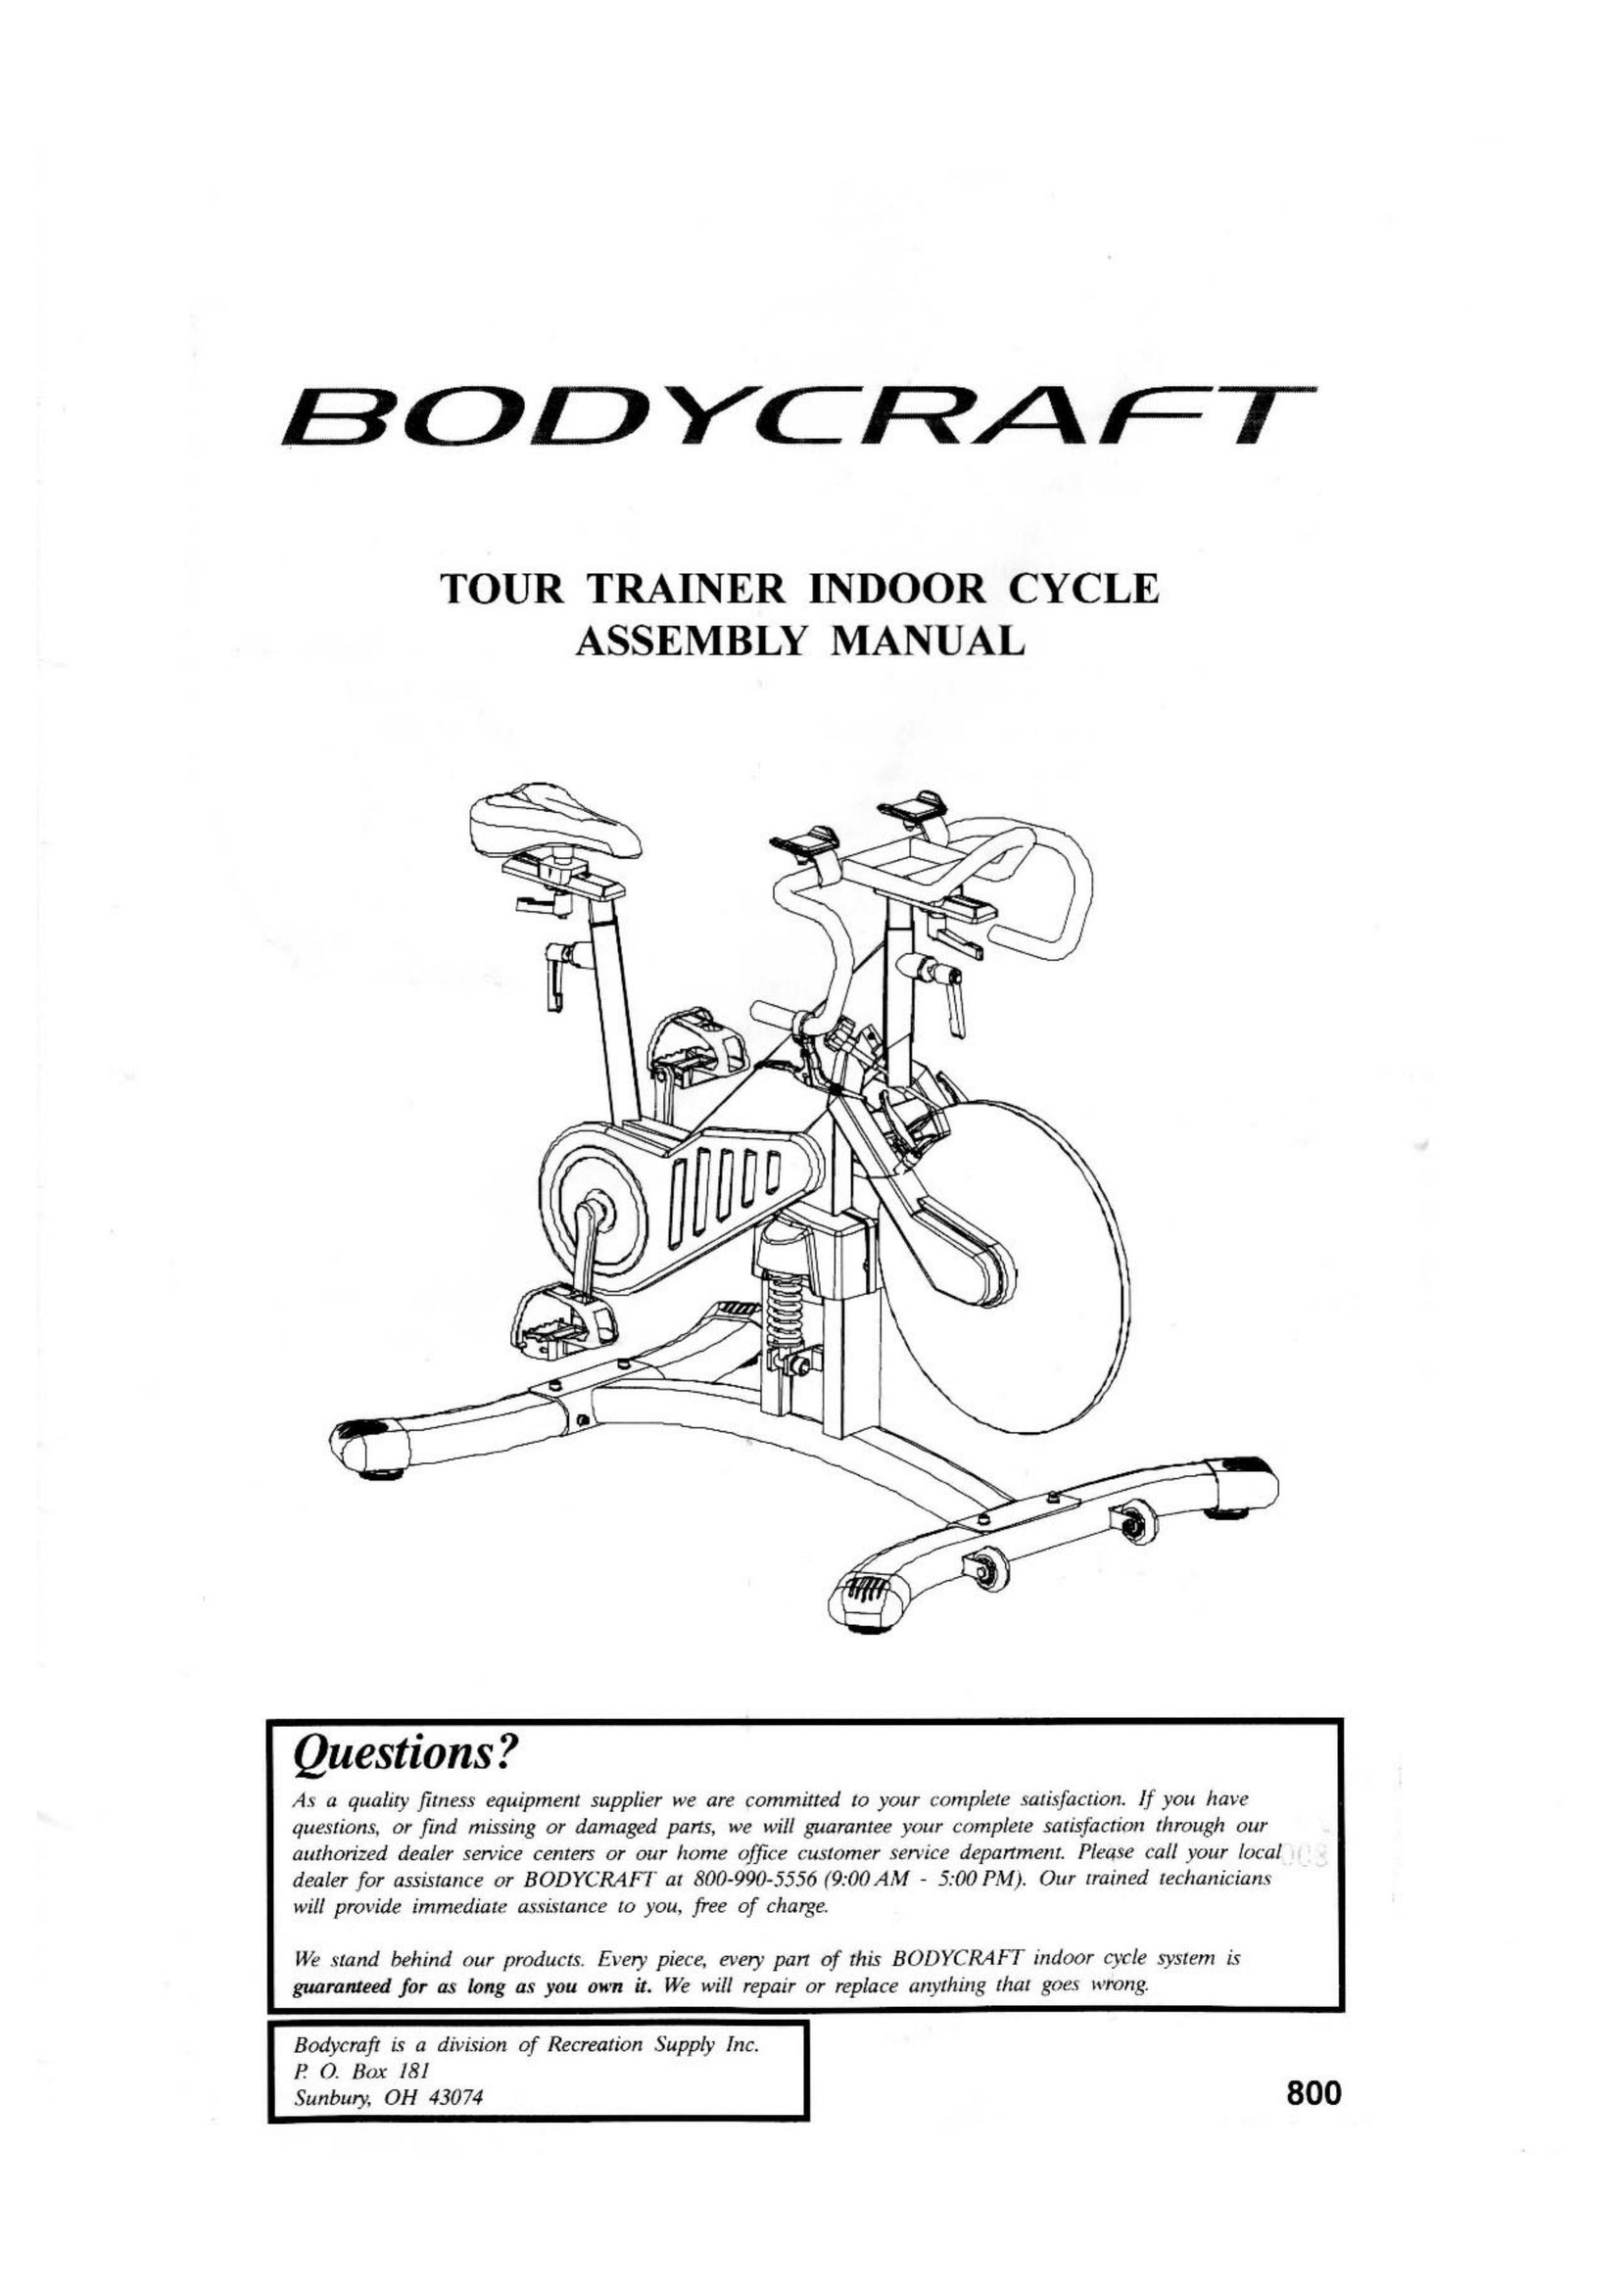 BodyCraft Tour Trainer Indoor Cycle Bicycle User Manual